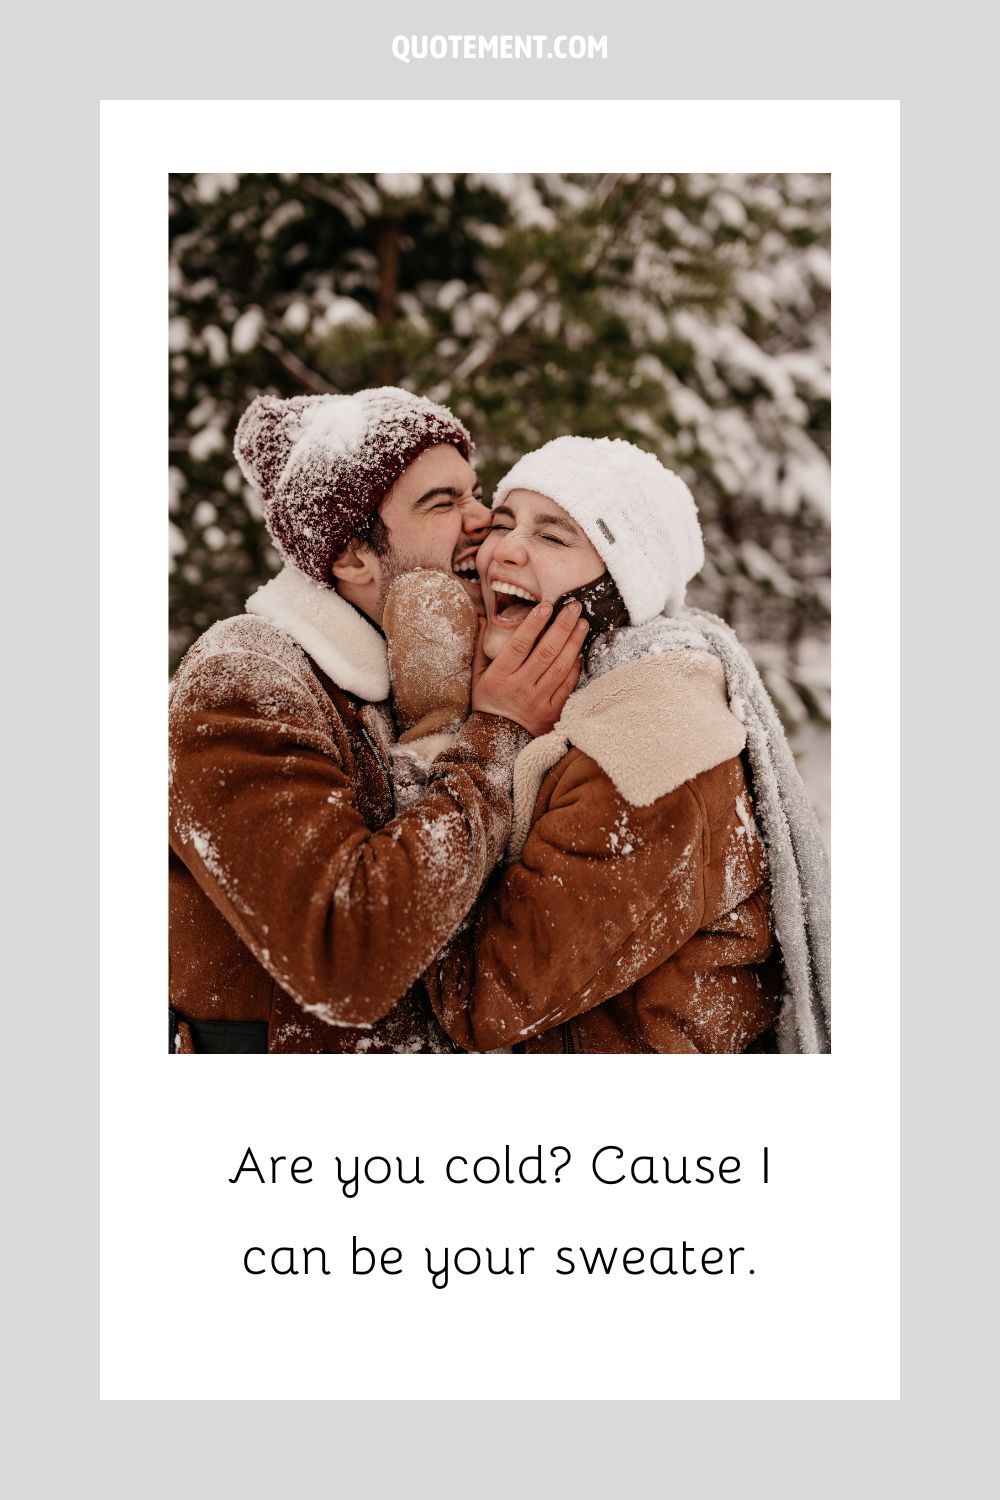 a happy couple shares a warm hug and laughter on a snowy day